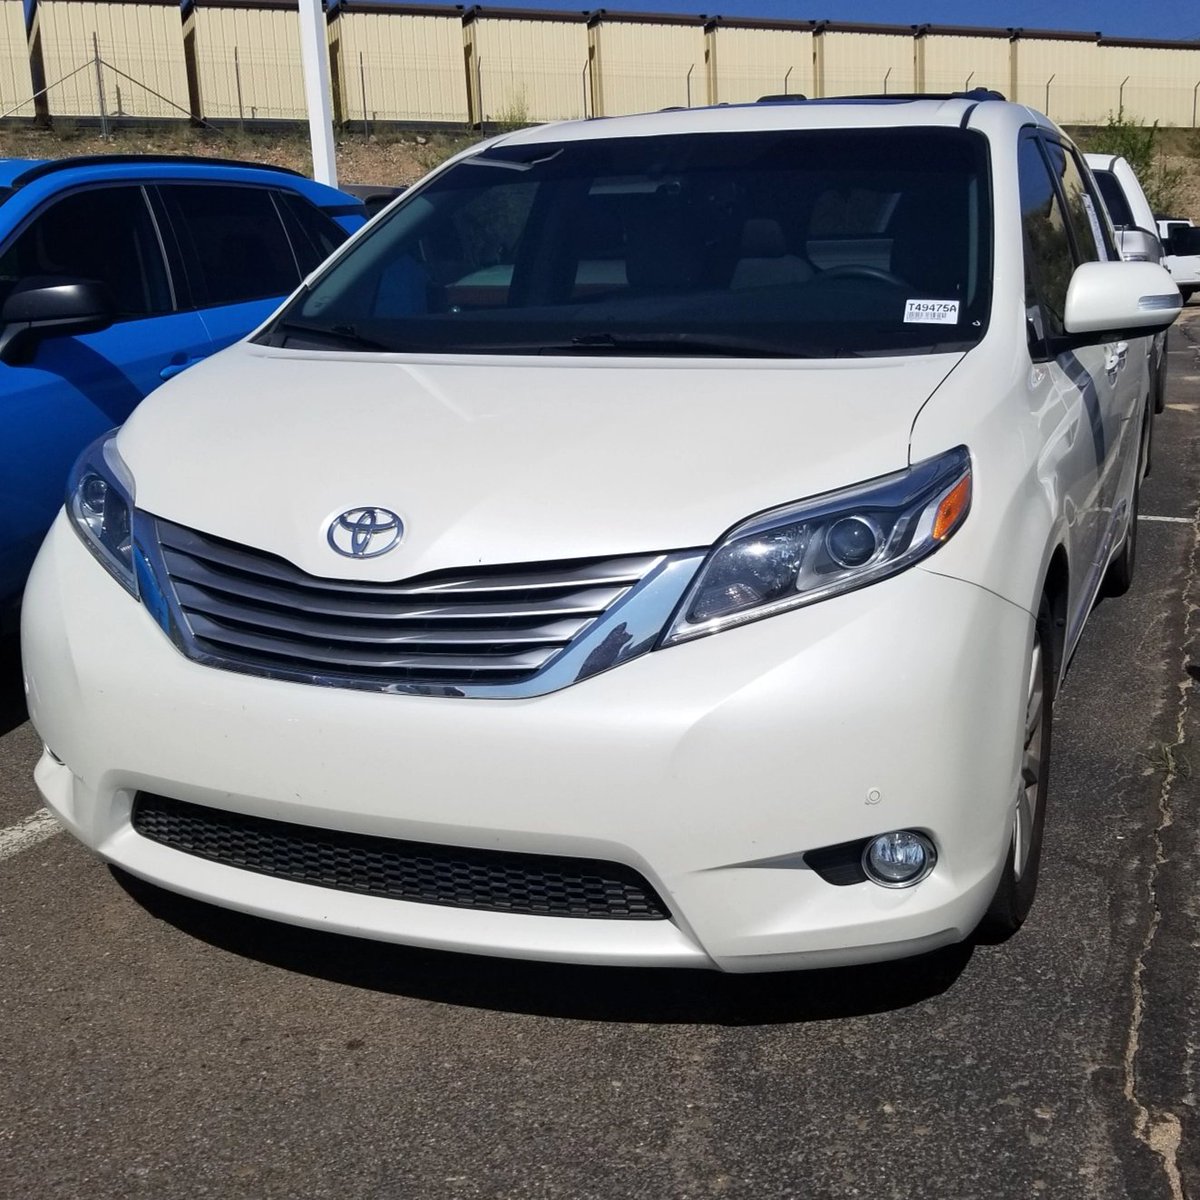 What's that!? A #MINIVAN that's considered 2017 #KBB #bestfamilycars! #Toyota #Sienna #Limited #Premium8-Speed Automatic w/OD #V6 #FWD #silverskymetallic #navigationsystem #sunroofmoonroof #electronicstabilitycontrol #carfaxoneowner
2017 #KBB #bestresalevalue #PRESCOTTAZ 
$32,392